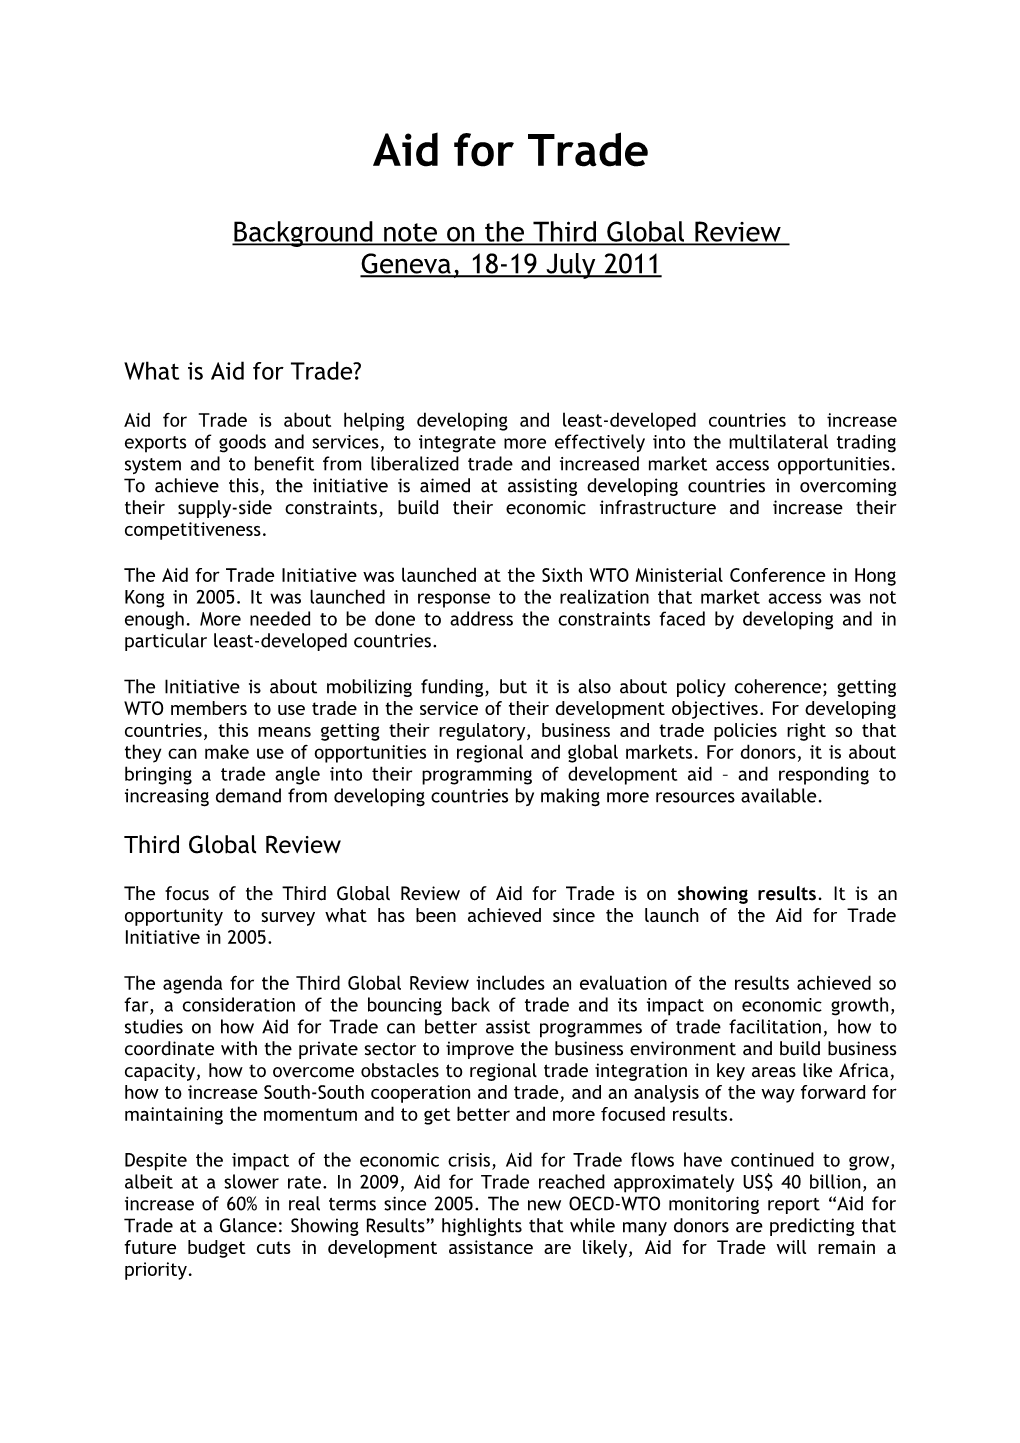 Background Note on the Third Global Review